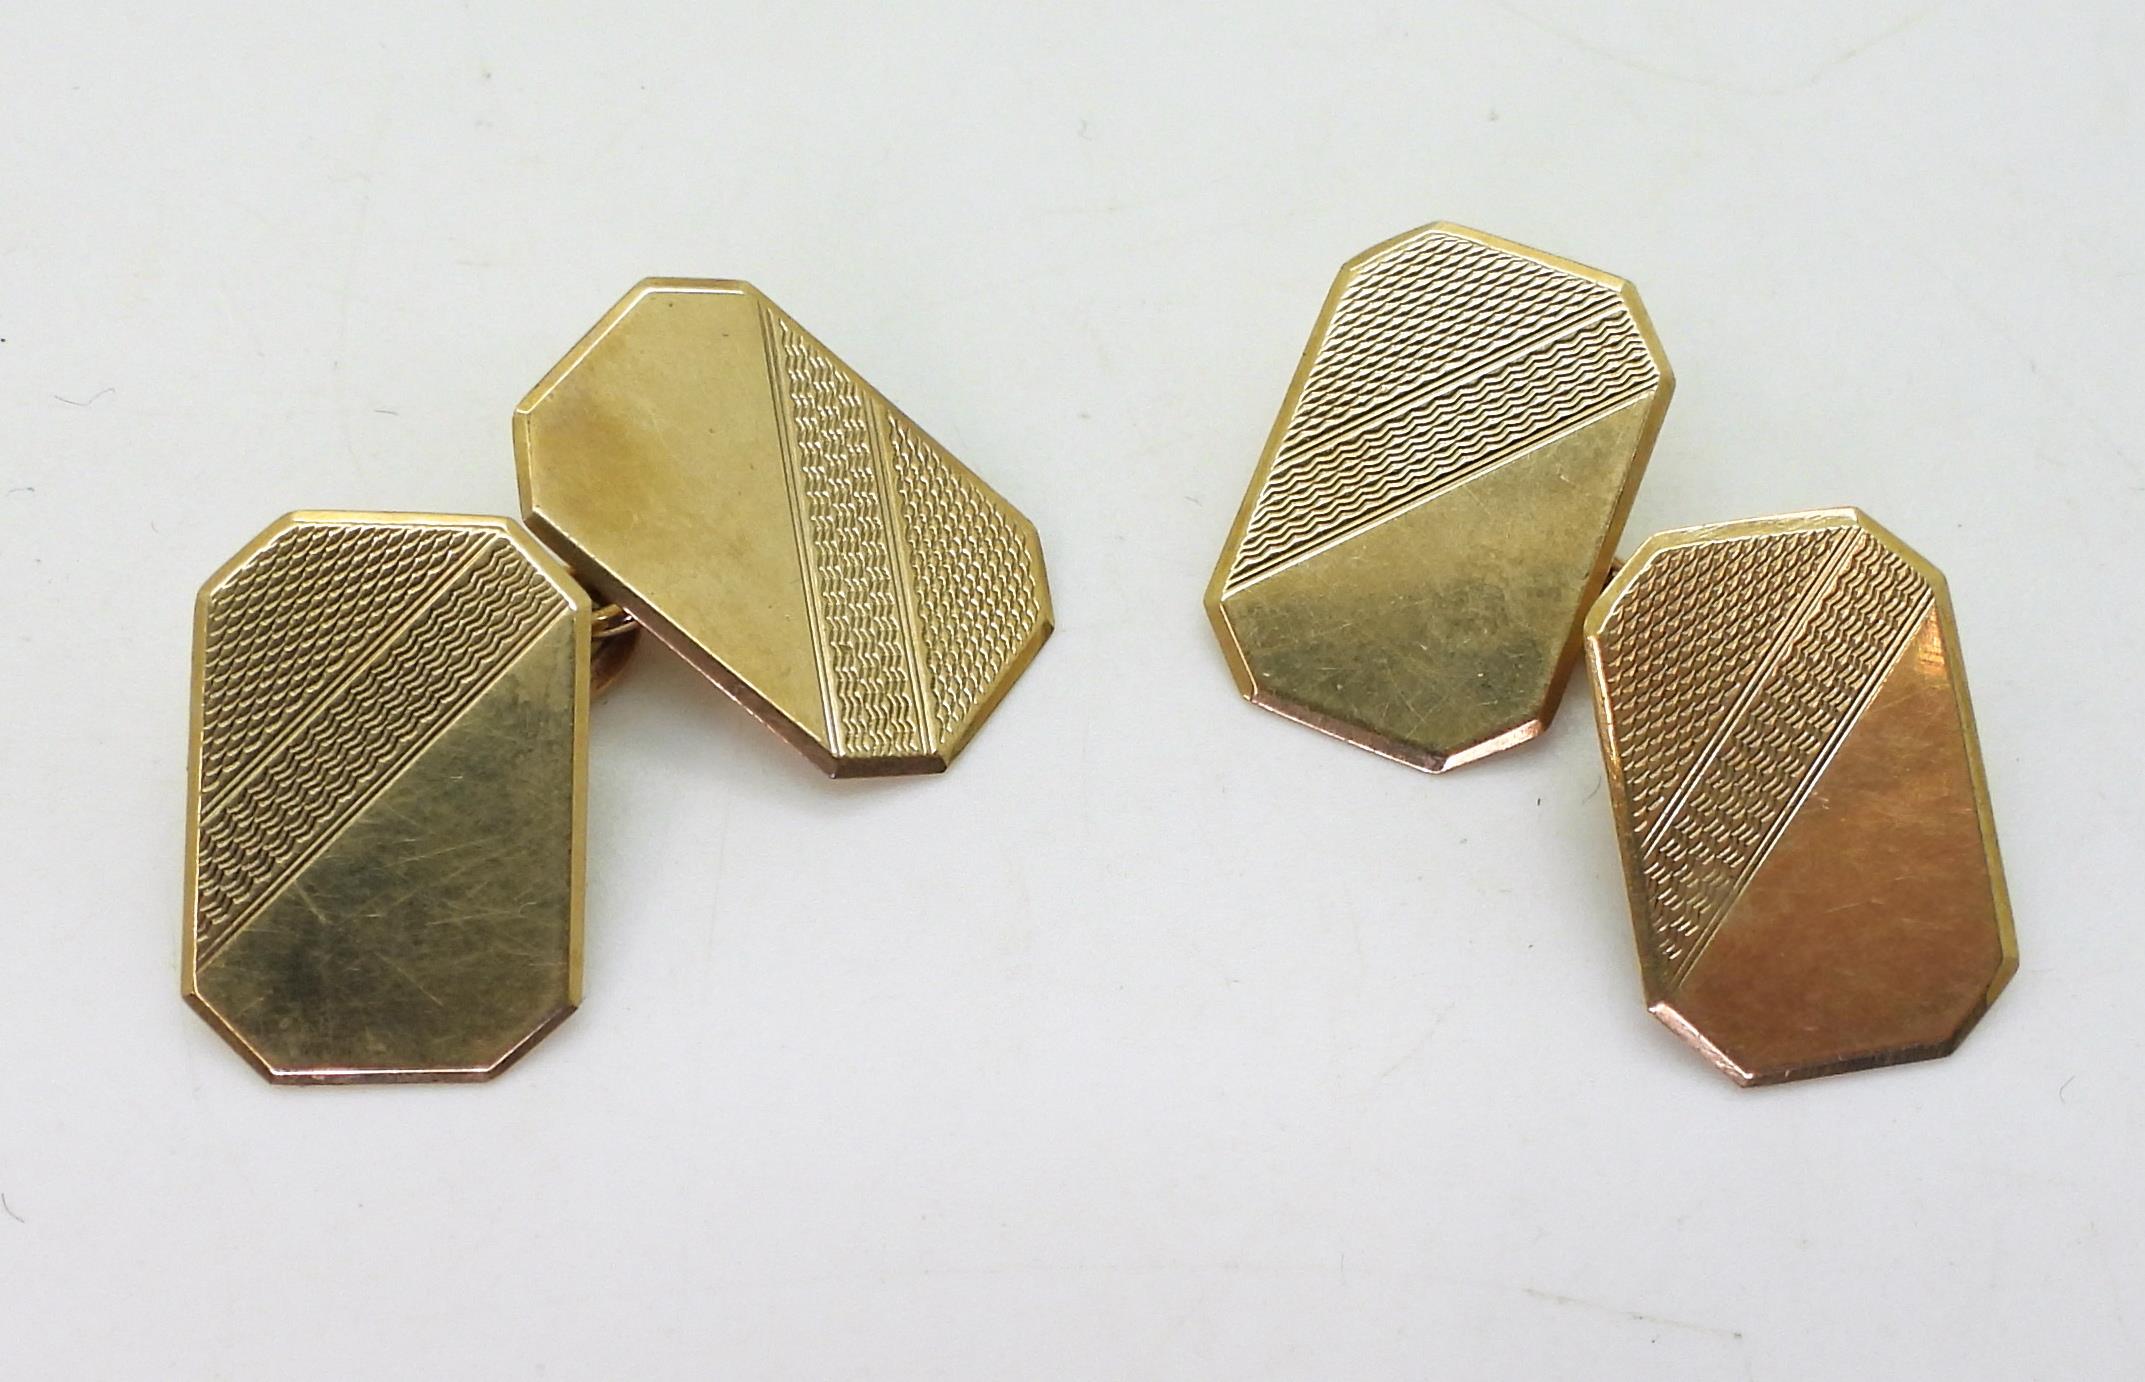 A pair of 9ct gold engine turned engraved cufflinks with Chester hallmarks for 1935, weight 4.4gms - Image 2 of 4